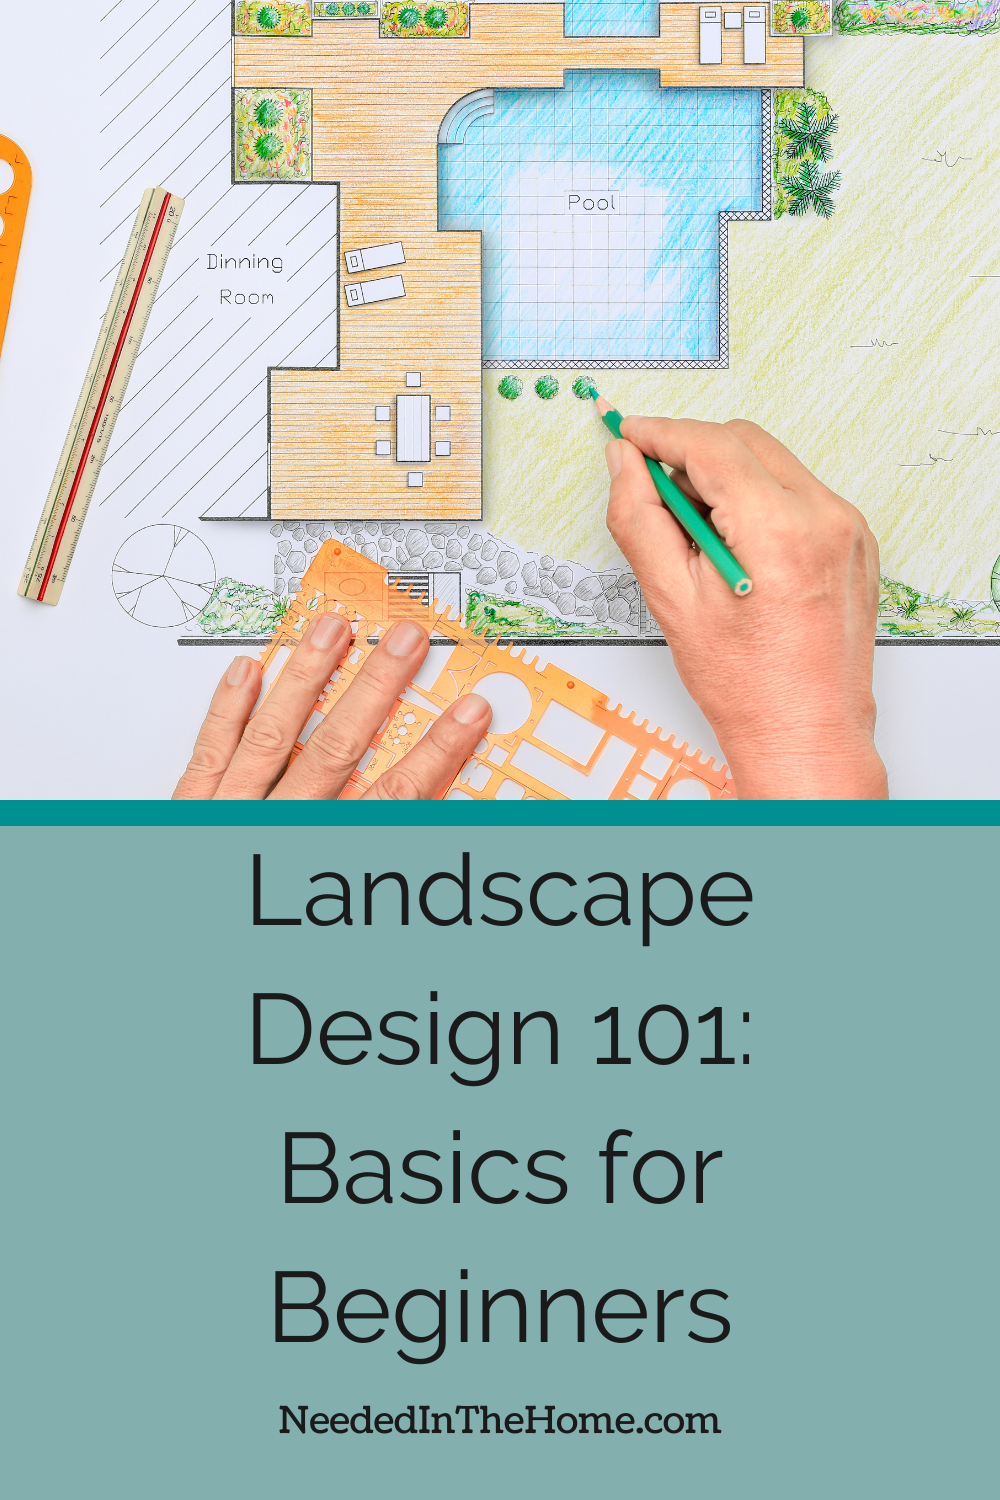 pinterest pin description landscape design 101 basics for beginners colored pencil drawing of planned backyard changes with hand coloring in bushes in green other hand holding stencil neededinthehome